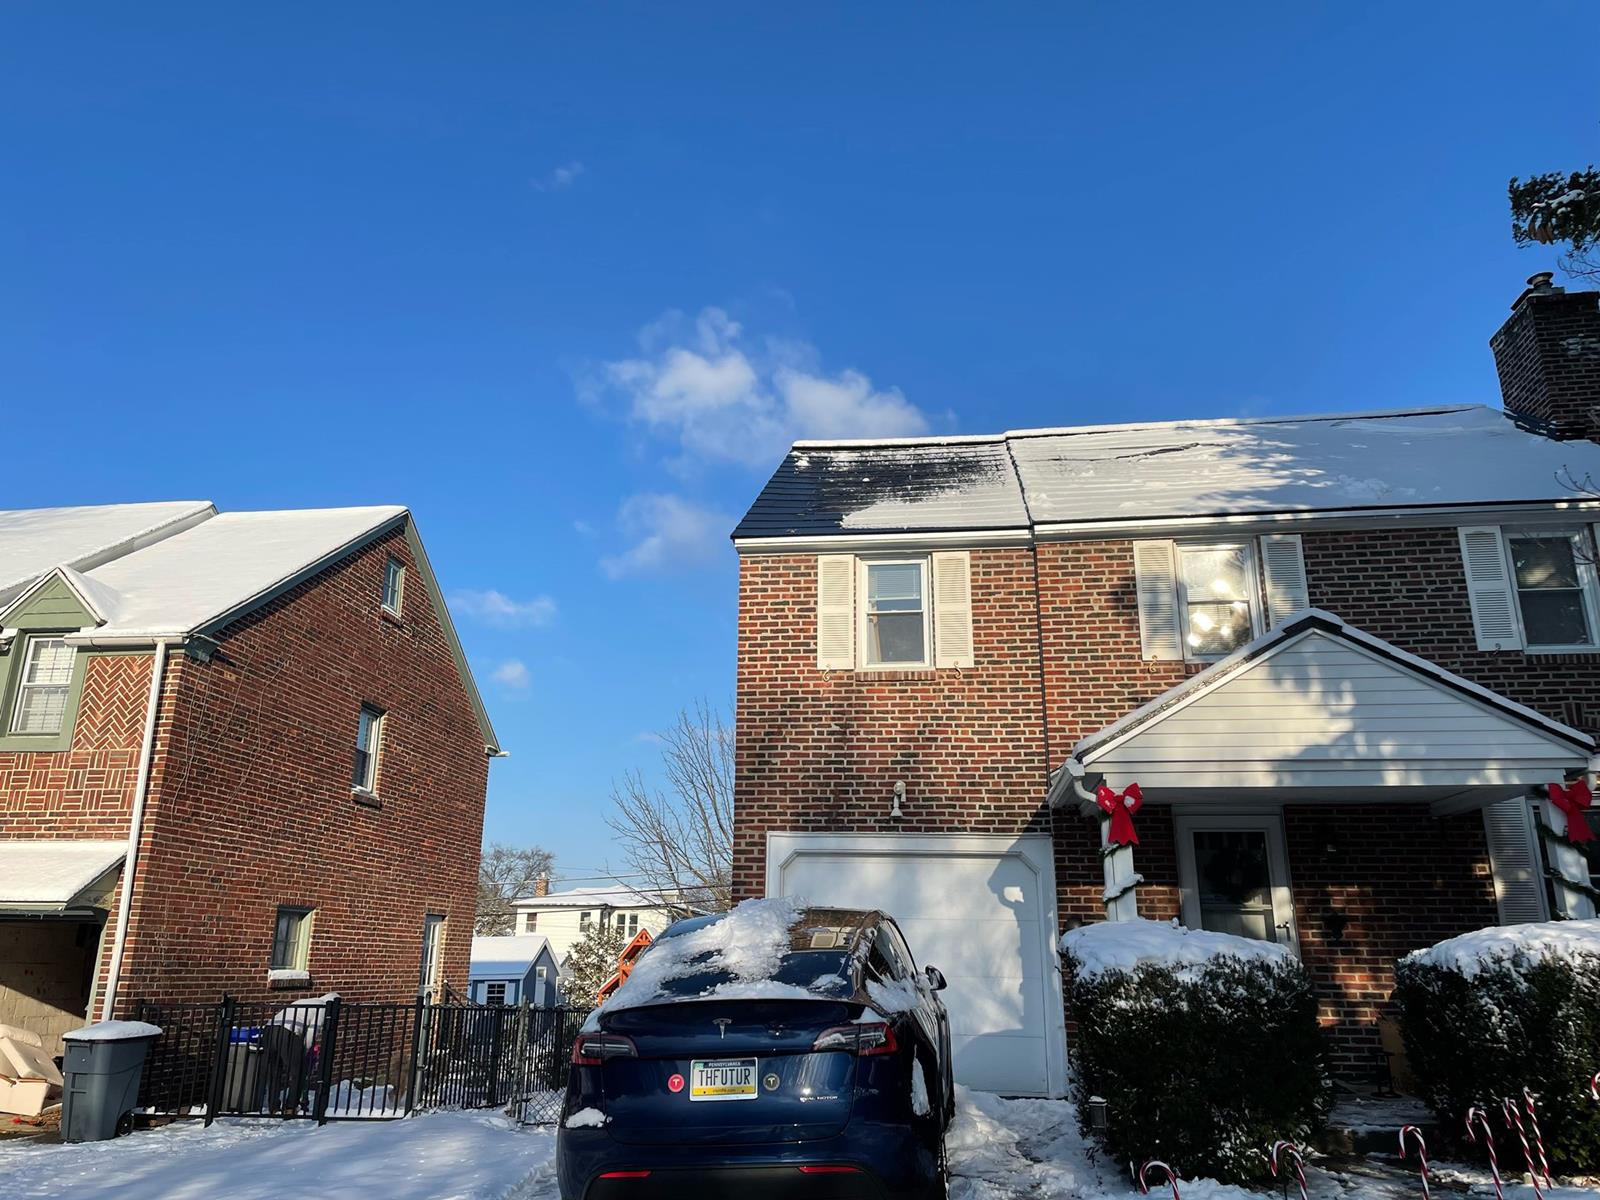 Why is snow on Tesla solar tiles not a problem?